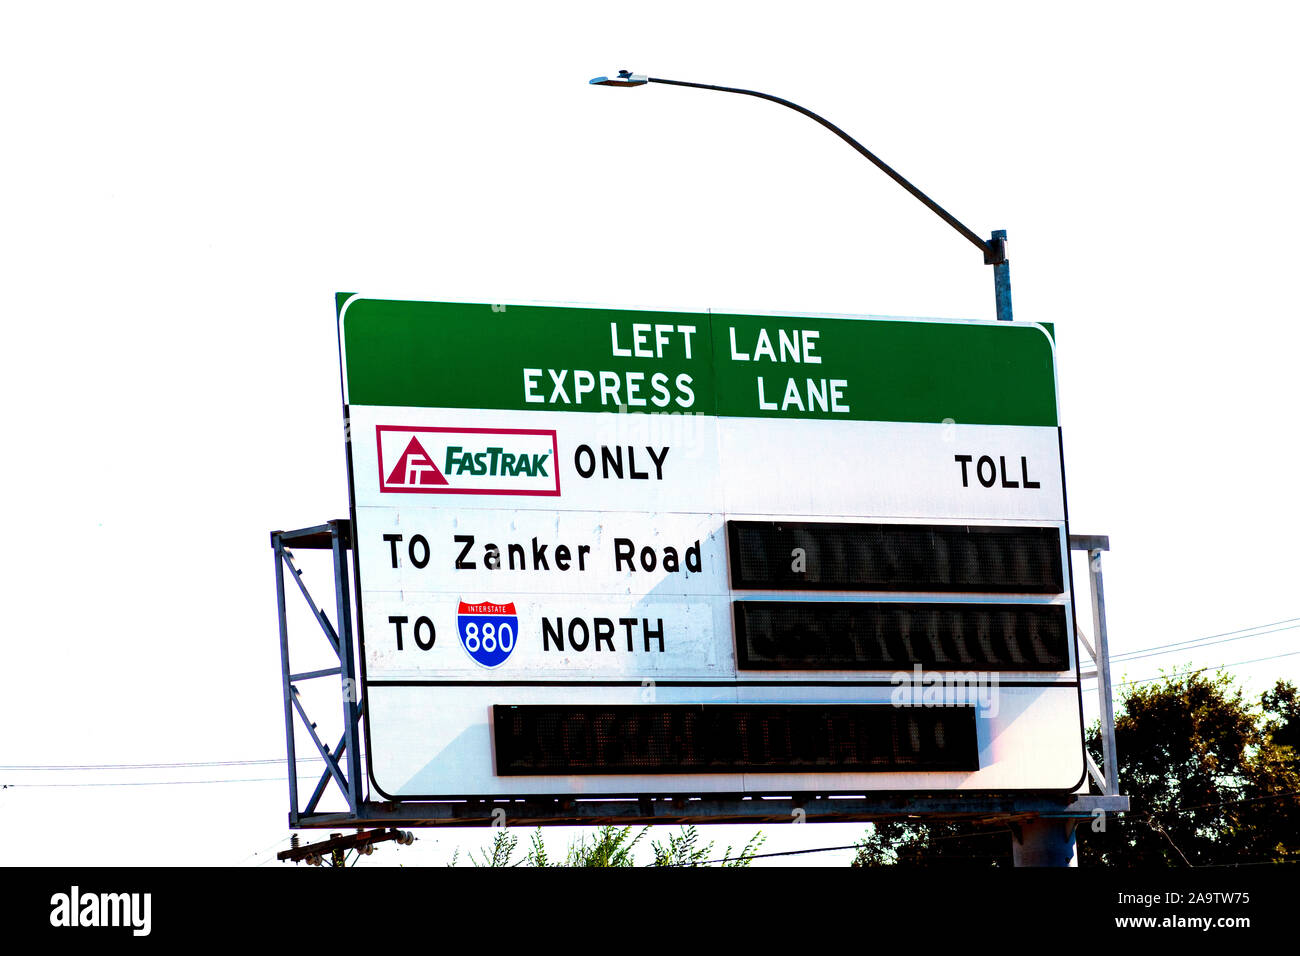 FasTrak sign. FasTrak is an electronic toll collection (ETC) system Stock Photo